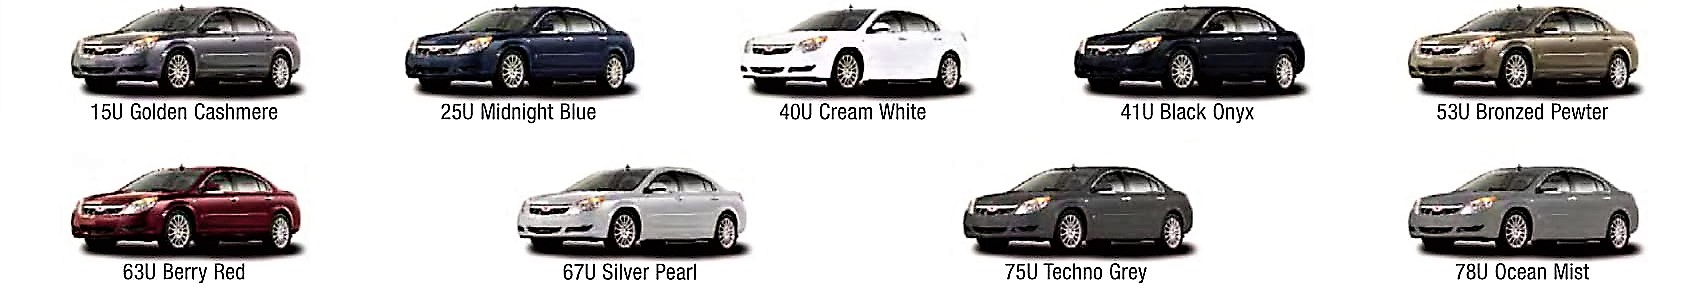 Gm 2007 Paint Charts And Codes - 2007 Saturn Aura Paint Colors Chart